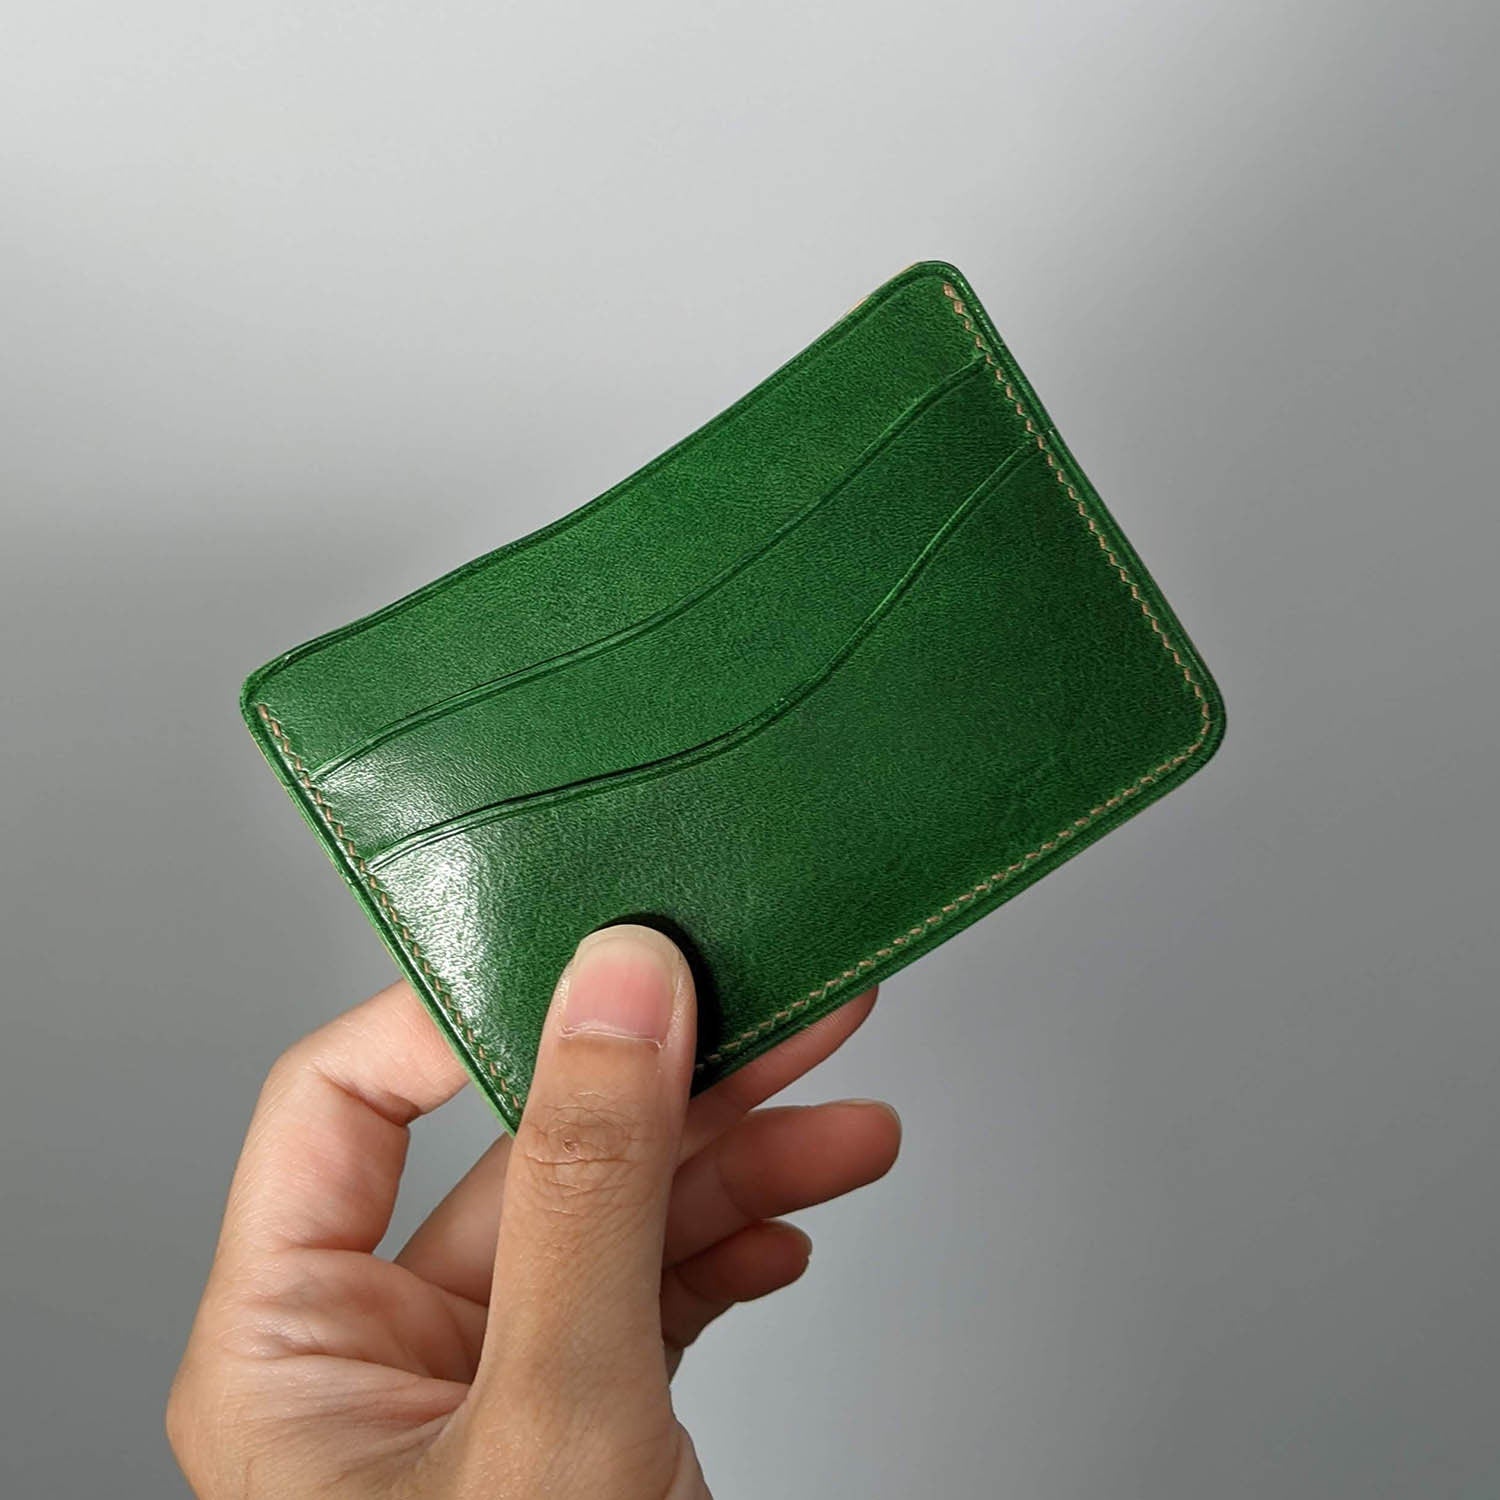 Made to Order Emerald Green and Natural Vegetable Tanned Italian Leather Minimalist Card Wallet Front Pocket Holder Brown Thread Hand Made 4 Pocket /